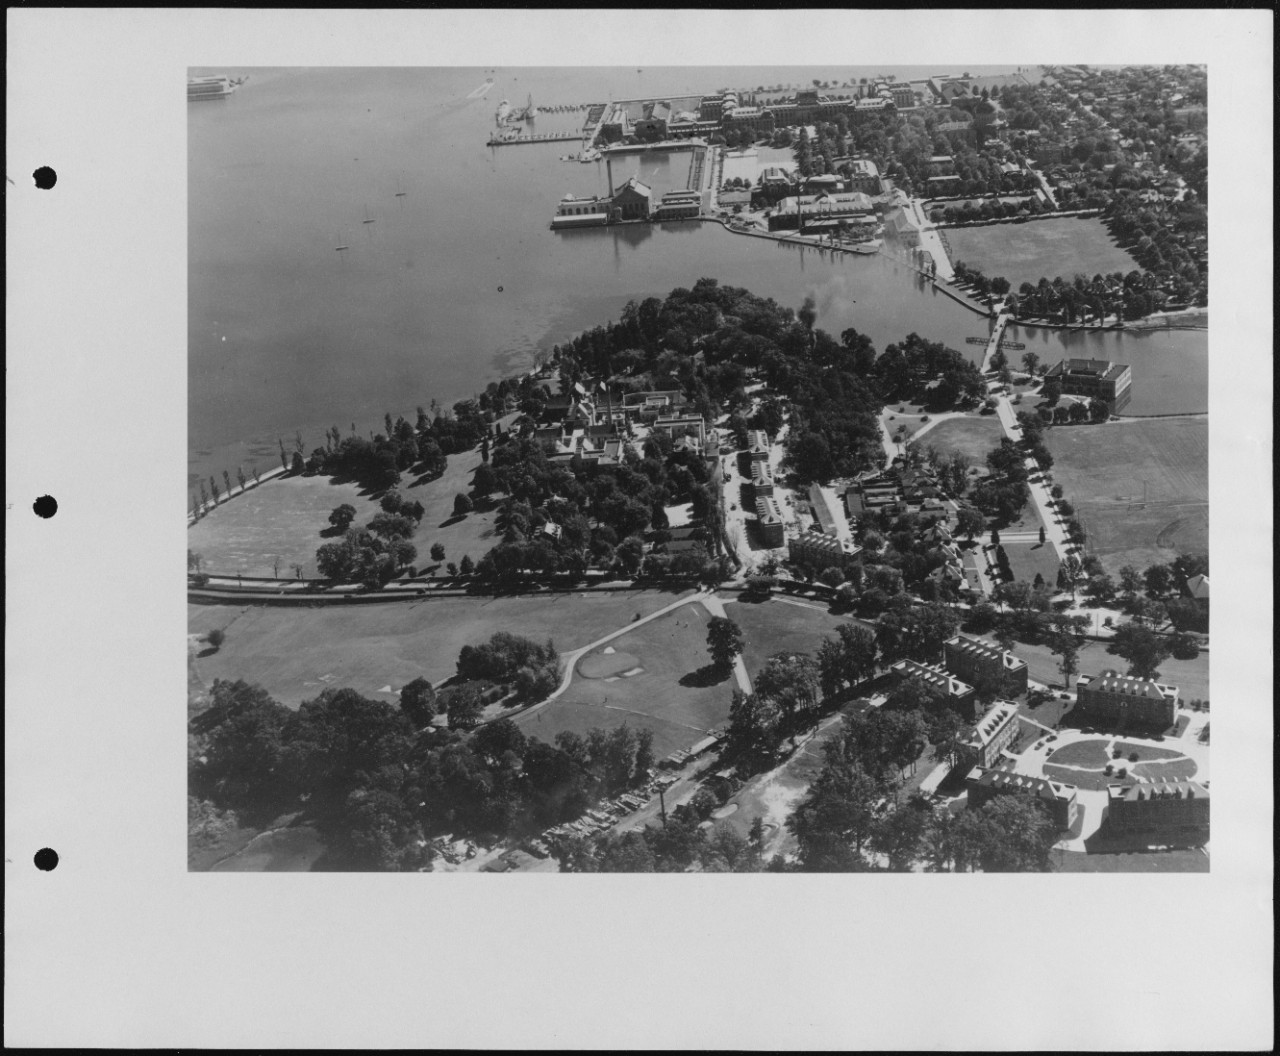 Aerial view of U.S. Naval Air Station, Anacostia, Washington, D.C. Naval Academy looking Southeast